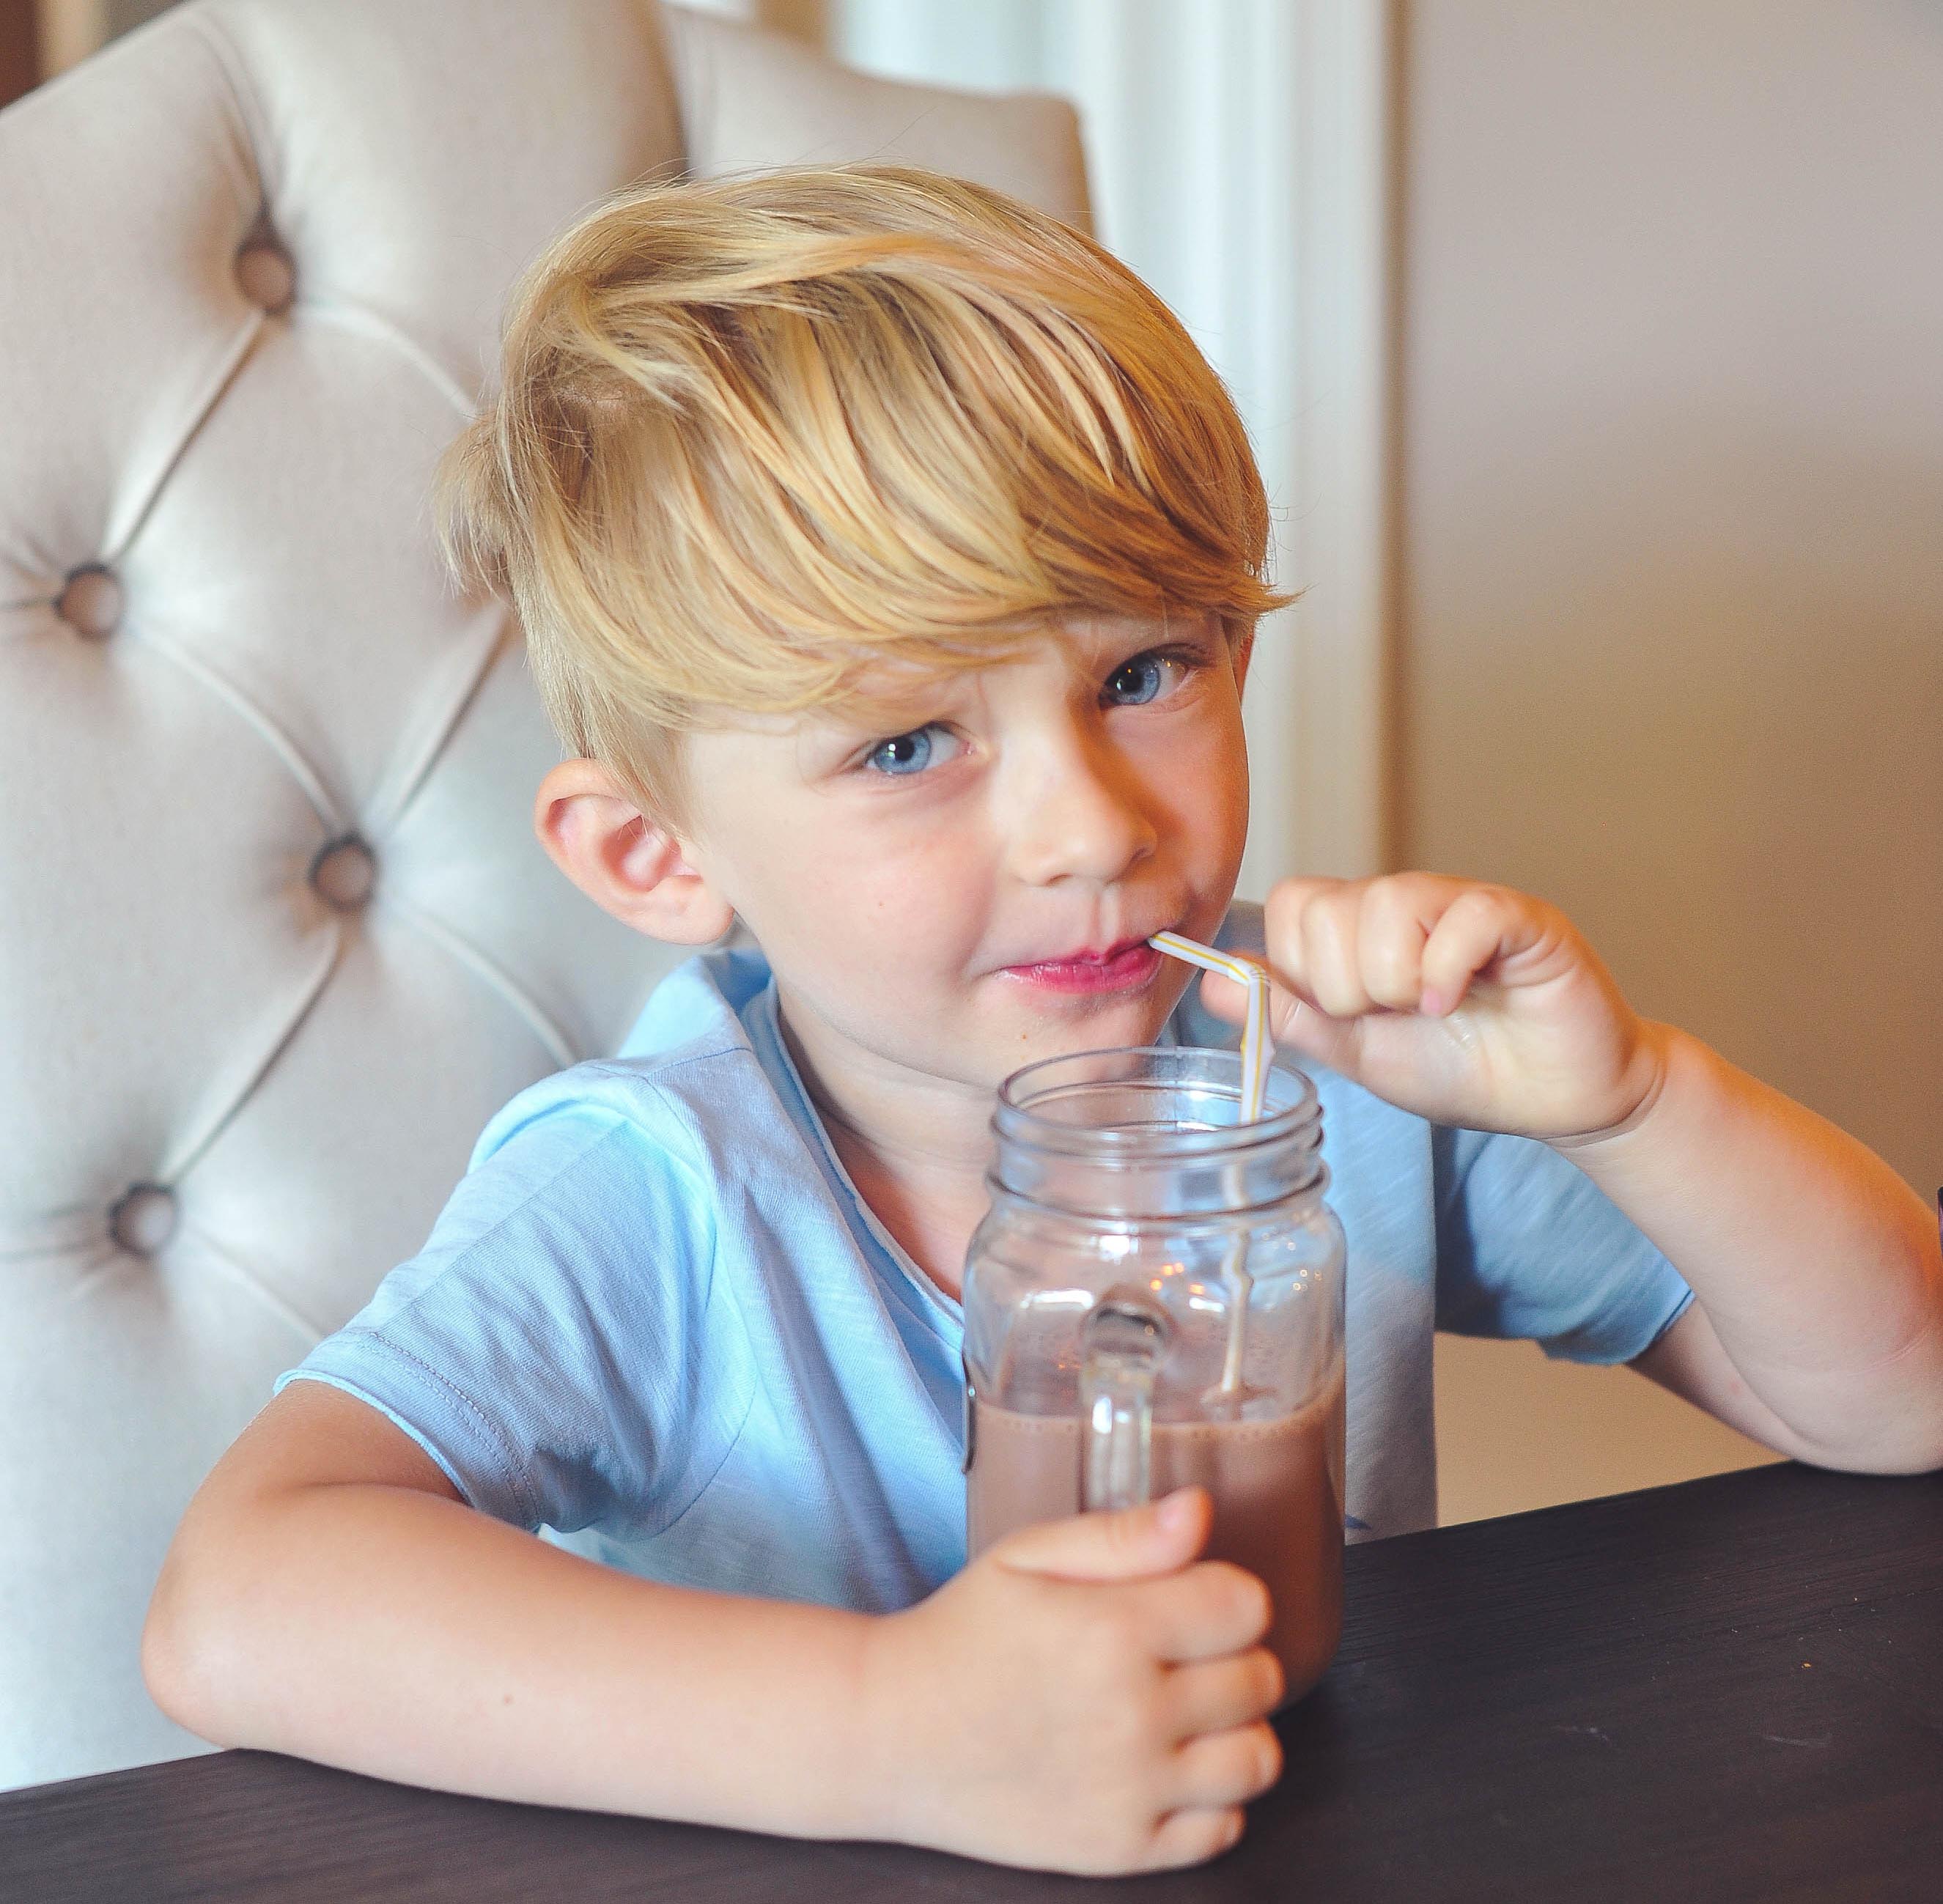 fairlife SuperKids Ultra Filtered Milk and Why We Love It by Atlanta blogger Jessica of Happily Hughes